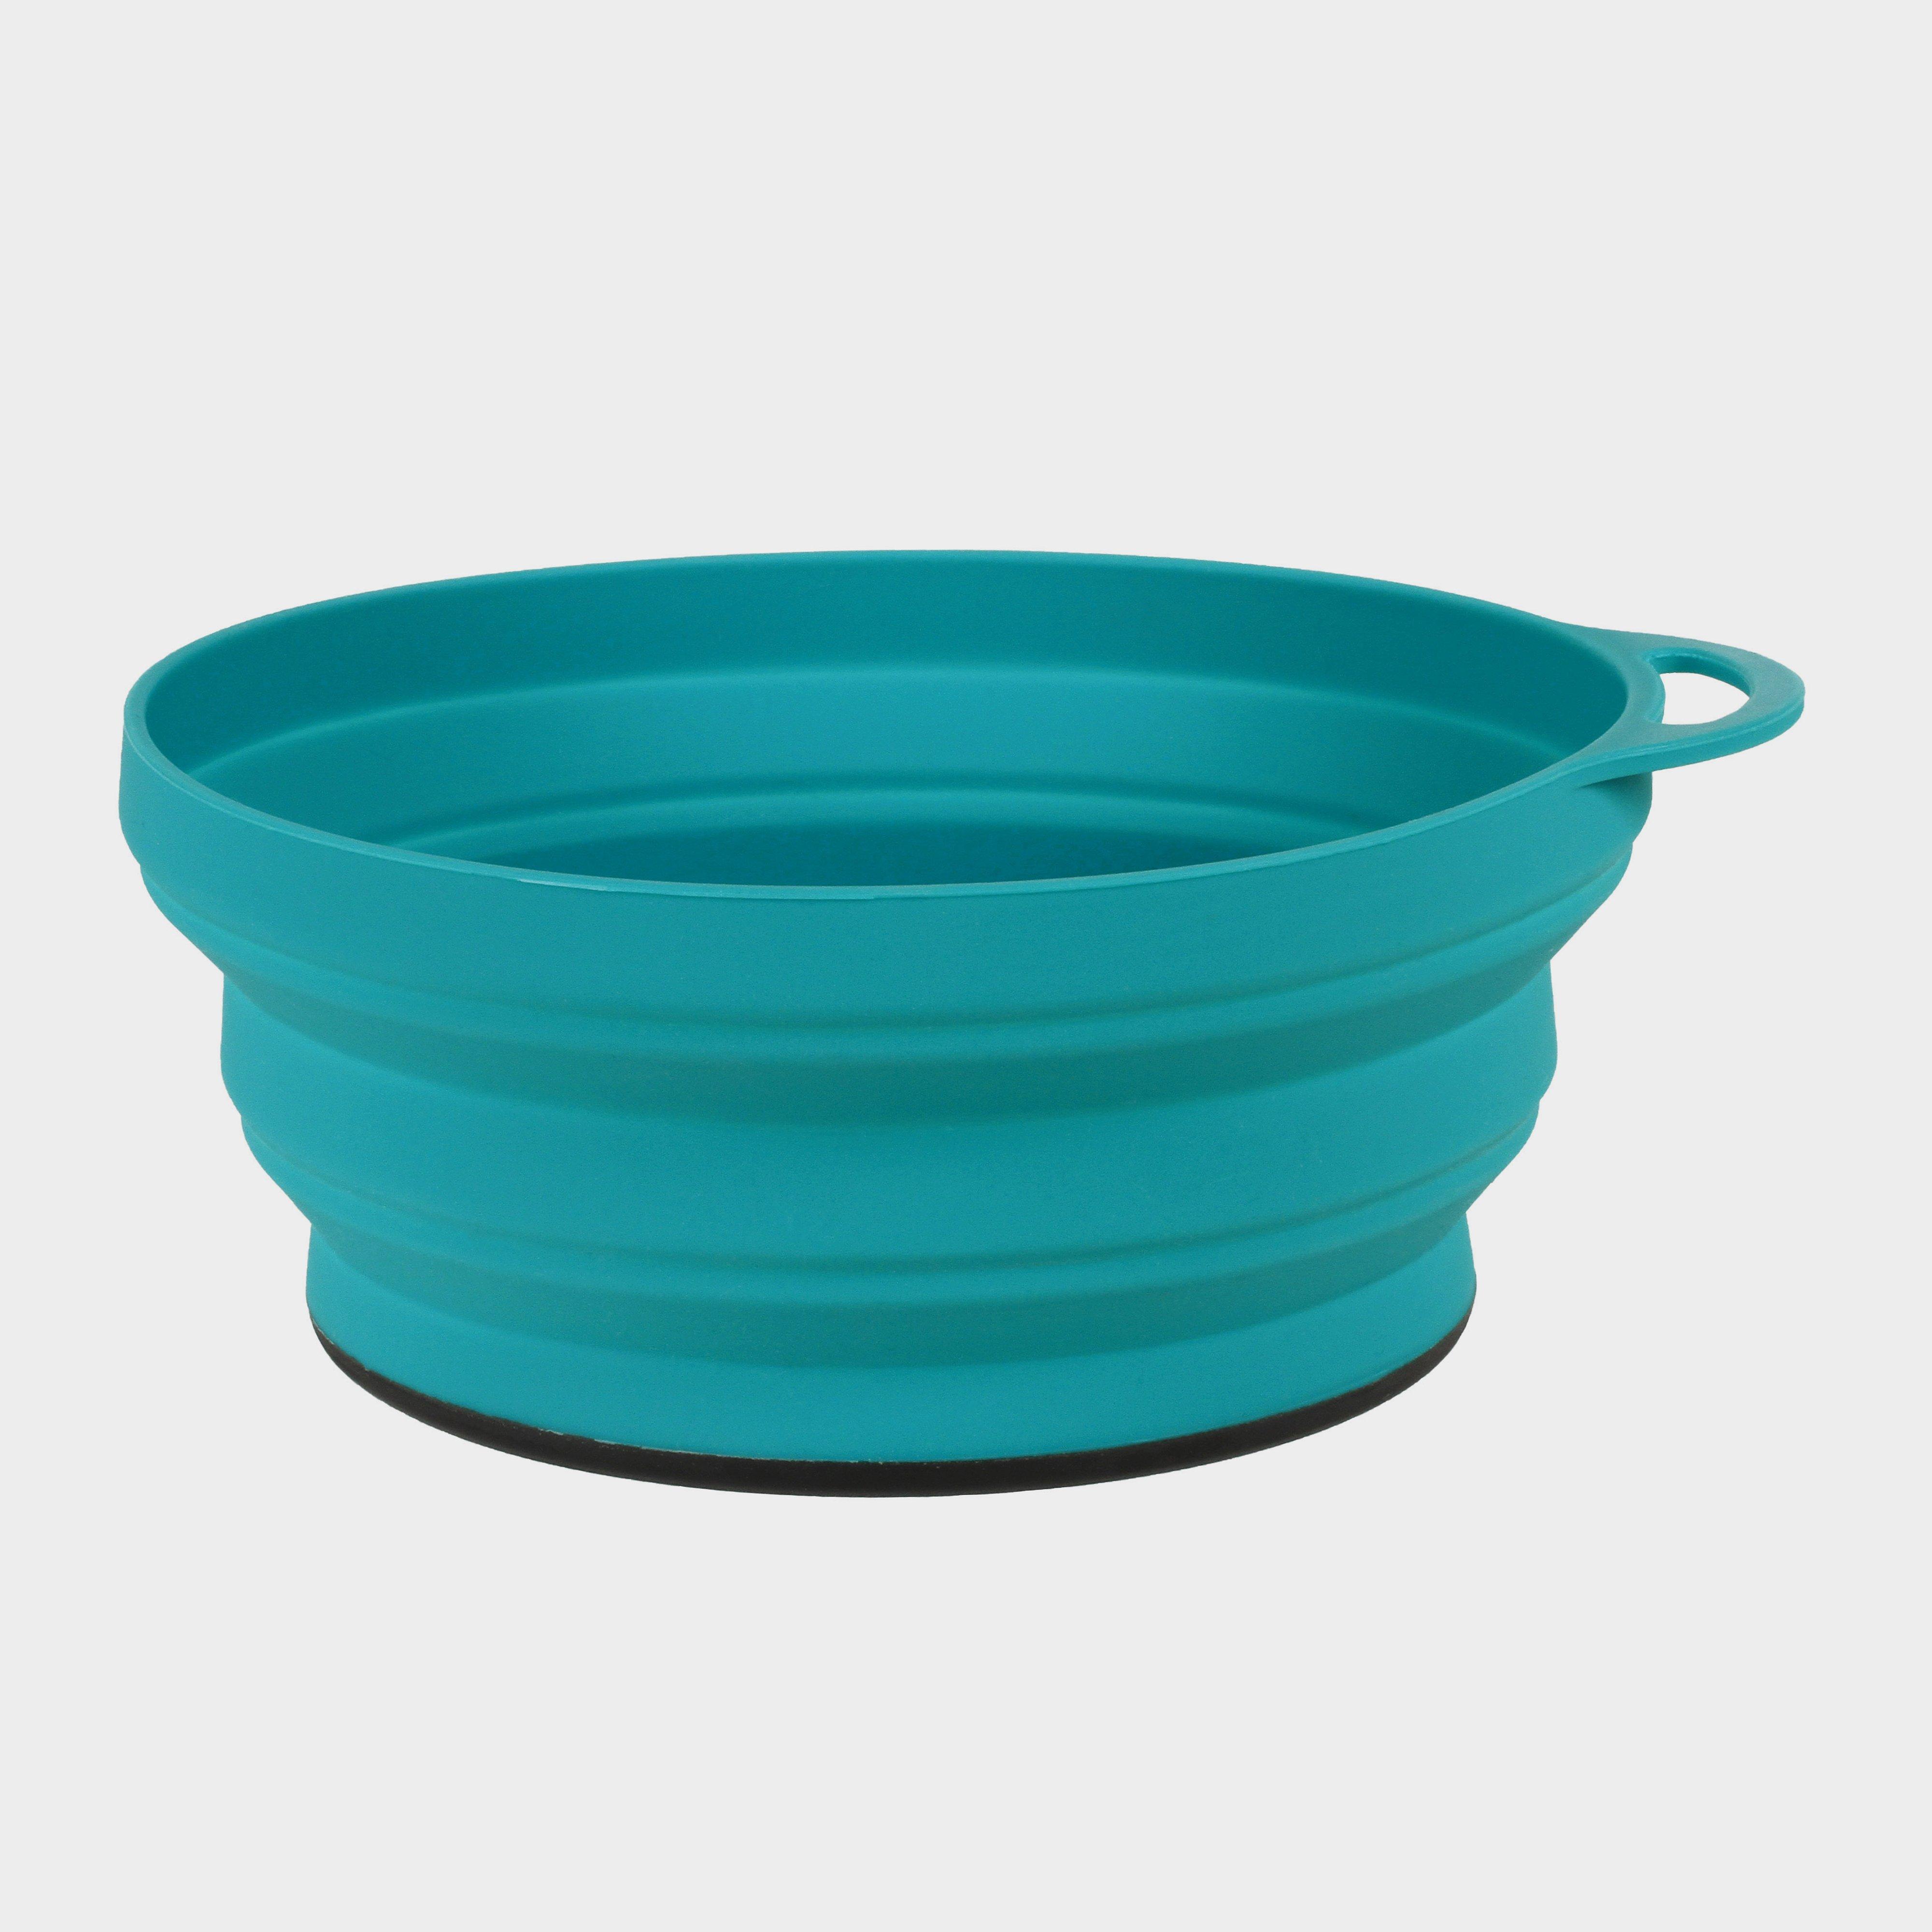 Photos - Other Camping Utensils Lifeventure Ellipse Collapsible Bowl, Blue 